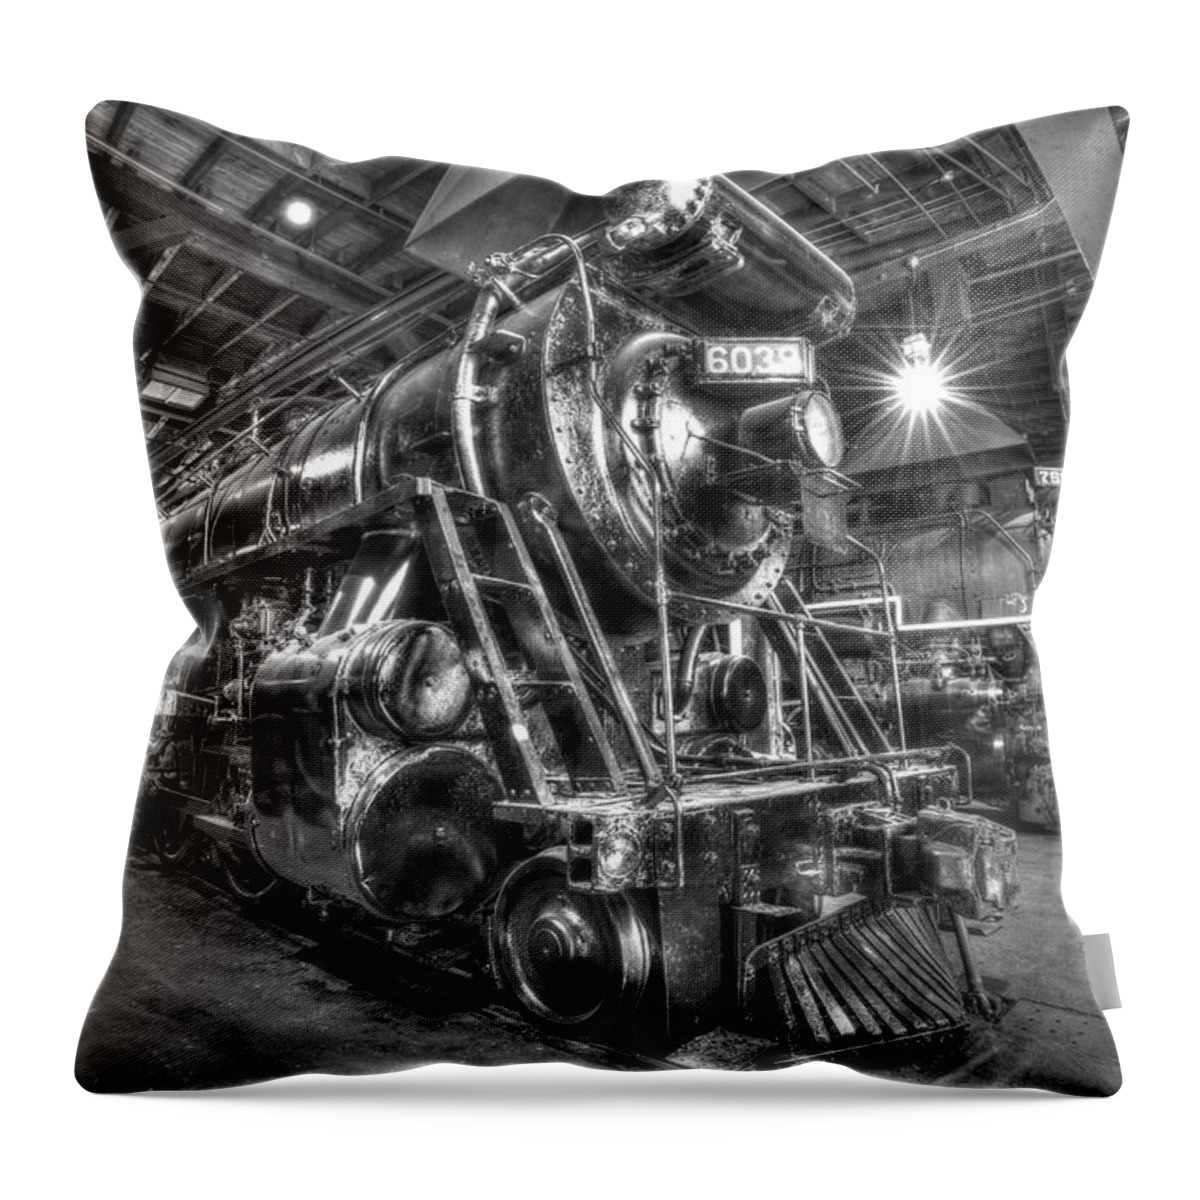 D2-rr-3269-b Throw Pillow featuring the photograph Sitting in the roundhouse #1 by Paul W Faust - Impressions of Light